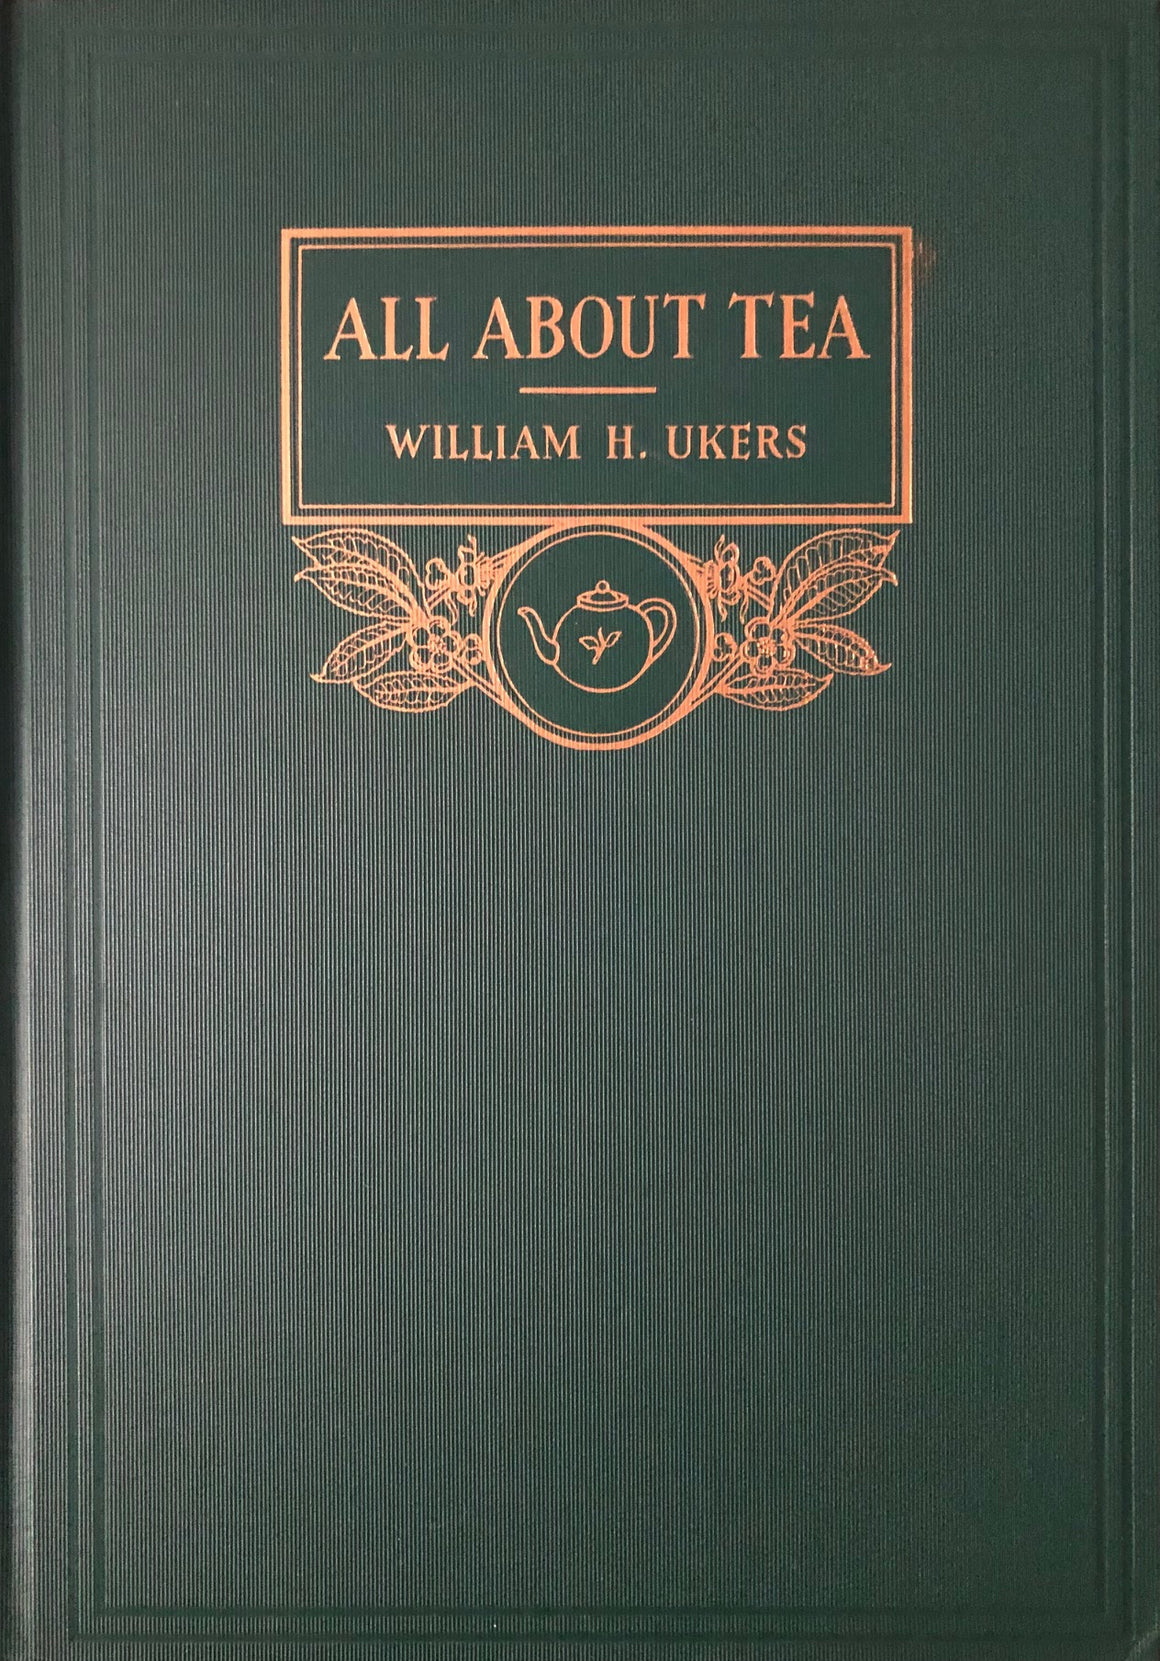 (*NEW ARRIVAL*) (Tea) Ukers, William H. All About Tea. 2 vols.